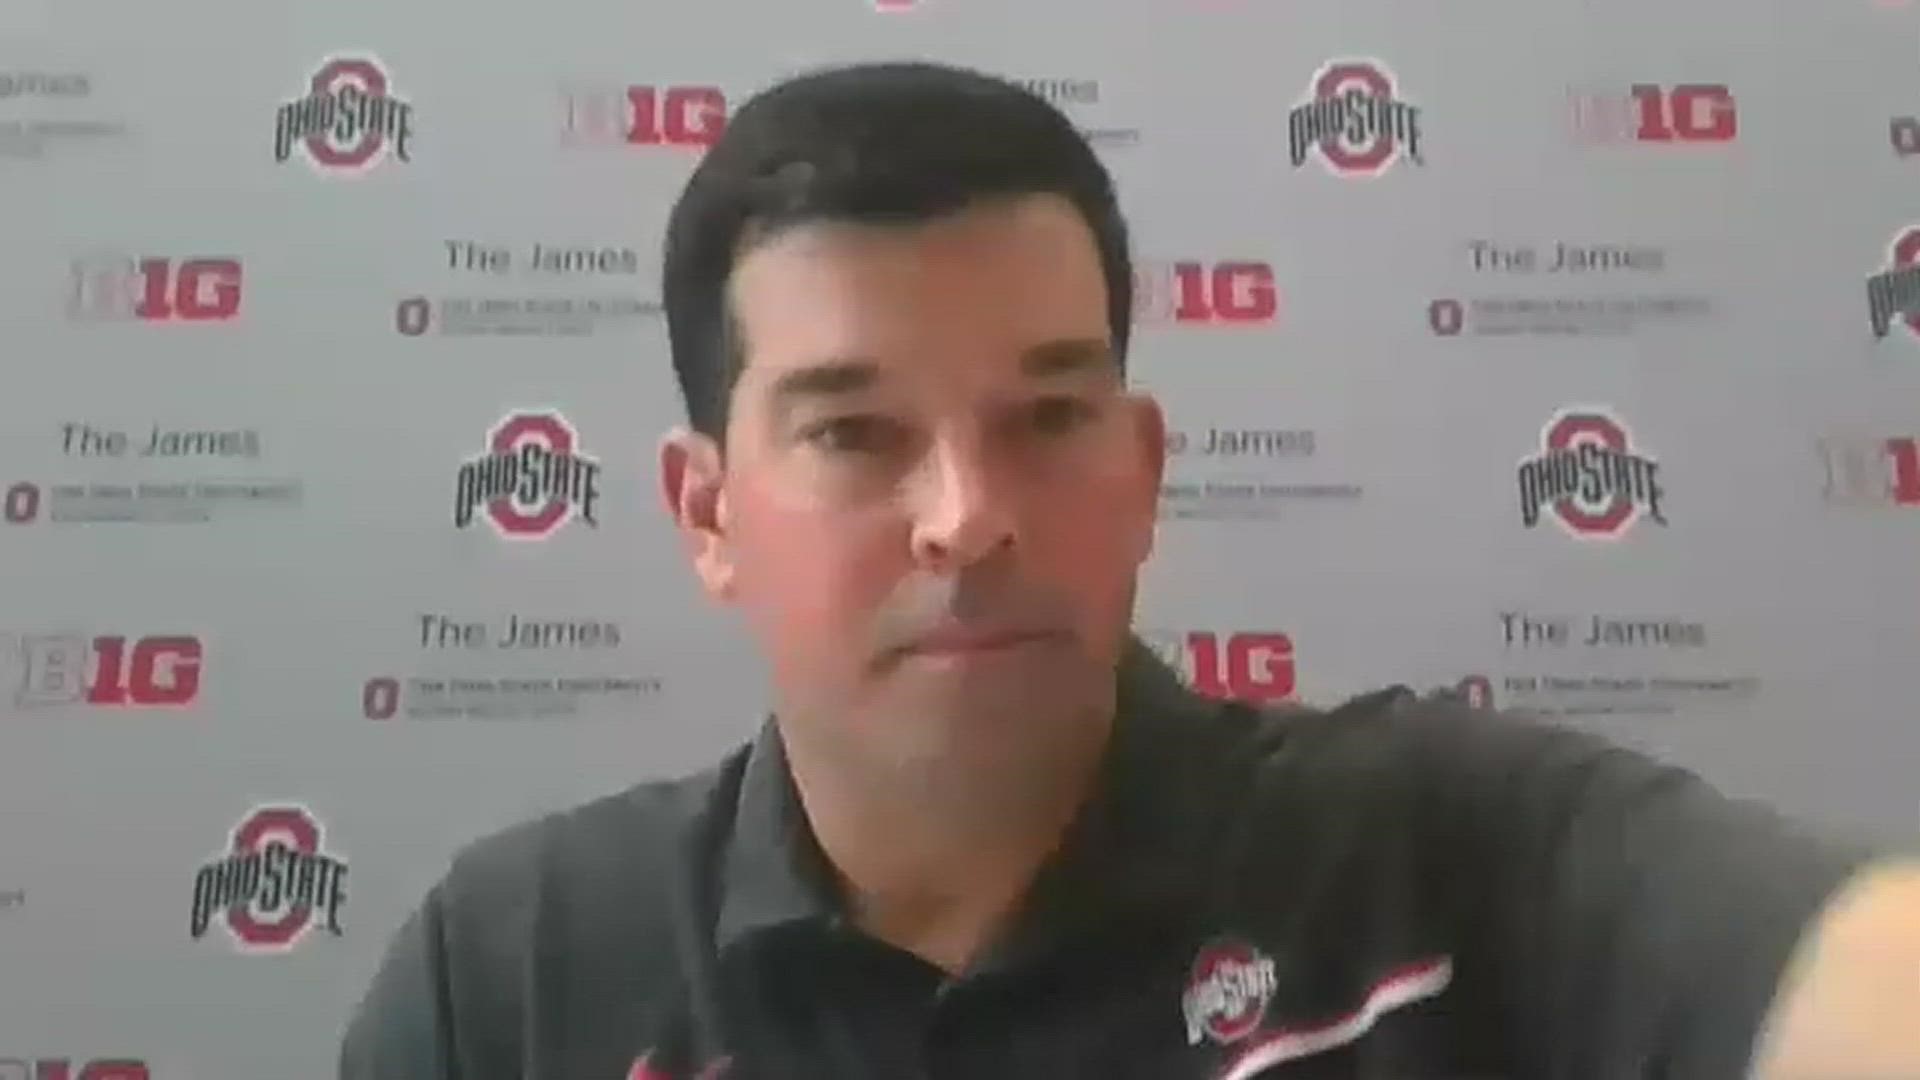 Ohio State head coach Ryan discusses the upcoming game against Maryland.